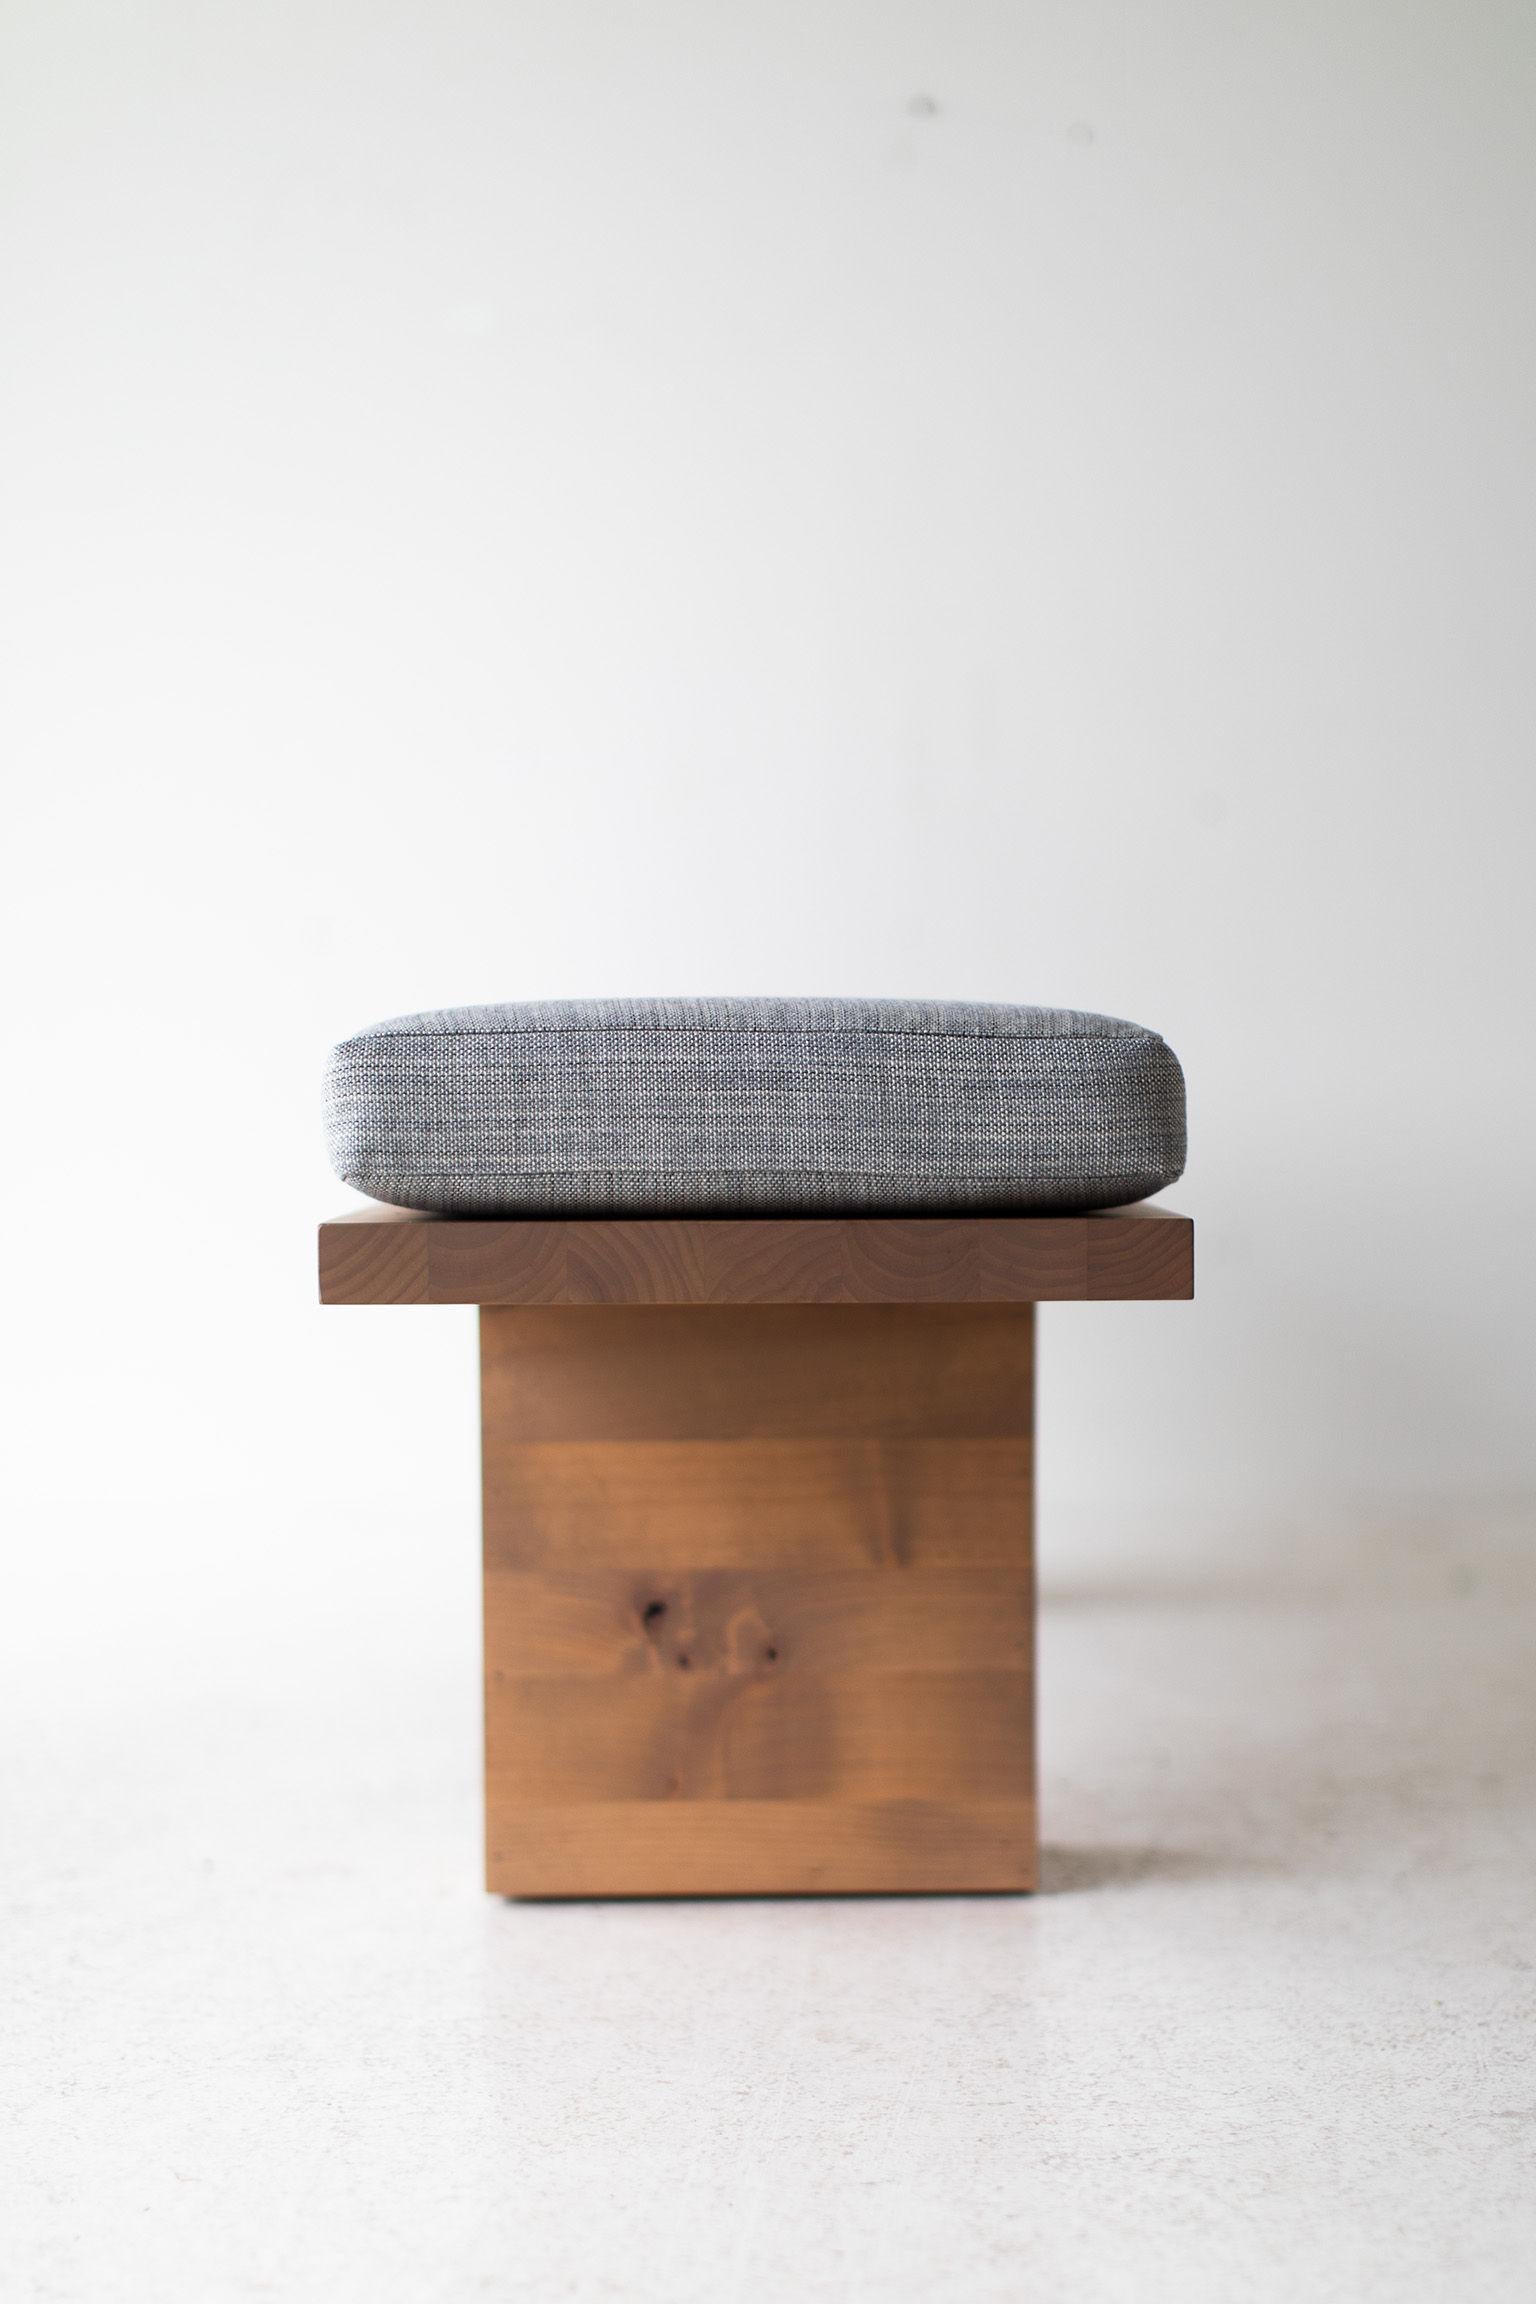 American Bertu Bench, Suelo Modern Wood Bench, Upholstered, Thick Weave For Sale